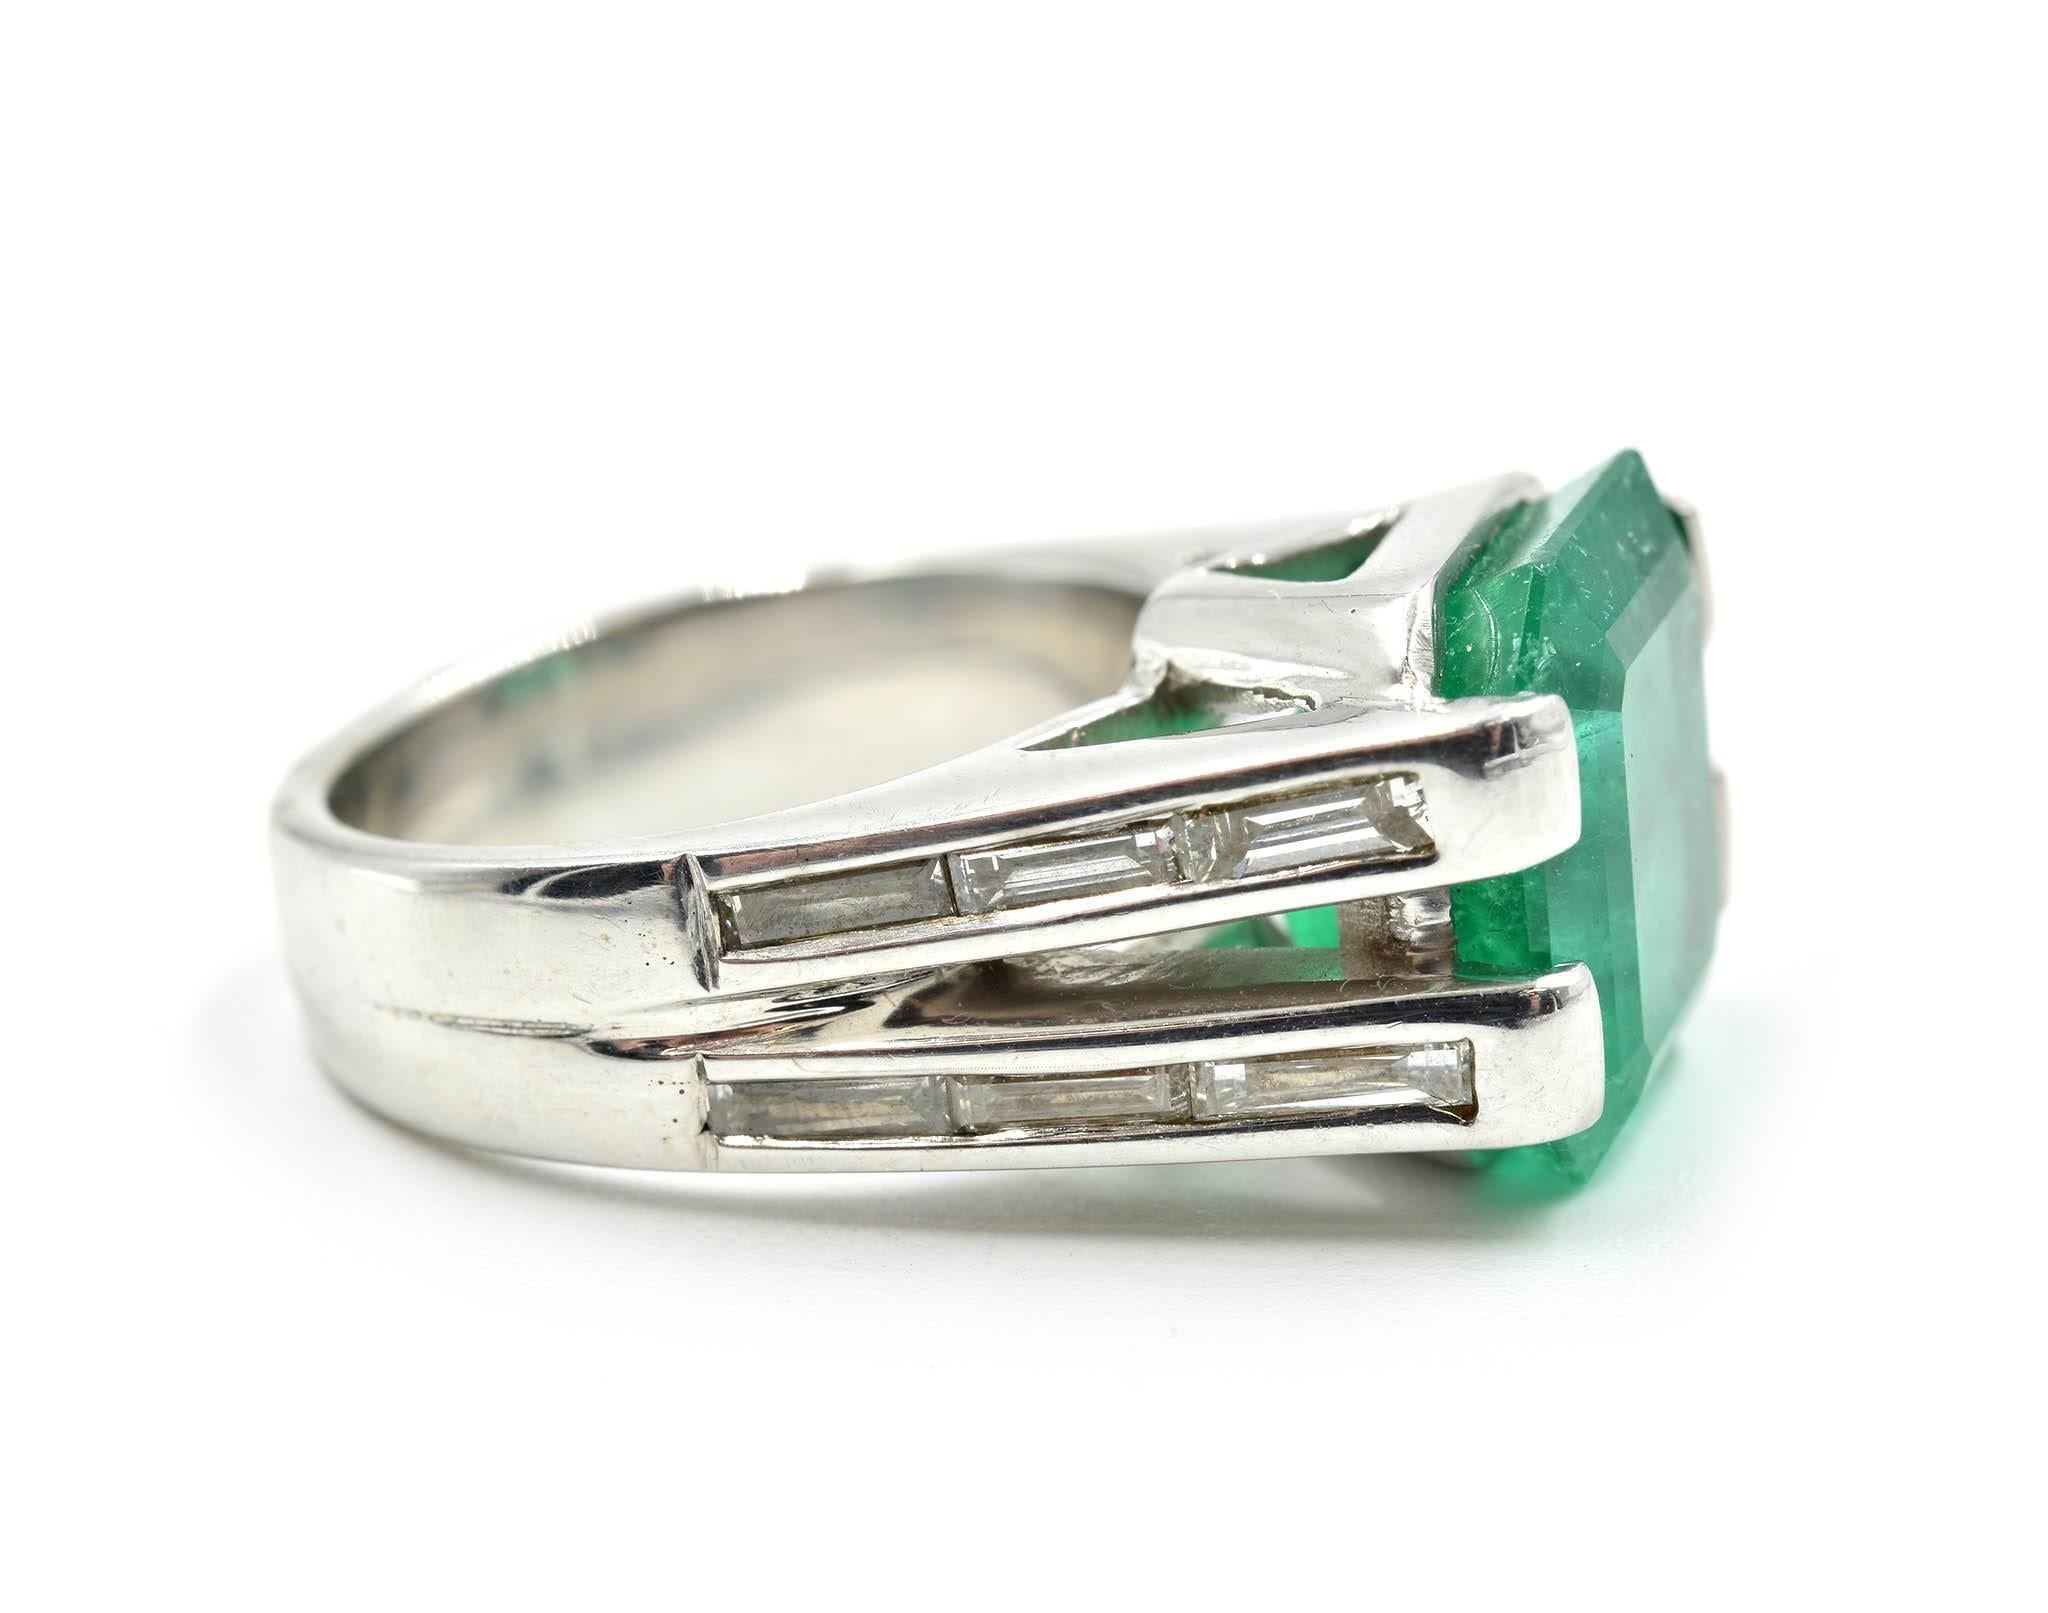 Designer: custom design
Material: 18k white gold
Emerald: transparent step-cut 6.86 carat emerald
Diamonds: 12 baguette cuts = 1.00 carat total weight
Color: H-I
Clarity: VS
Dimensions: ring top is 12.11mm long and 13.89mm wide
Ring Size: ring size